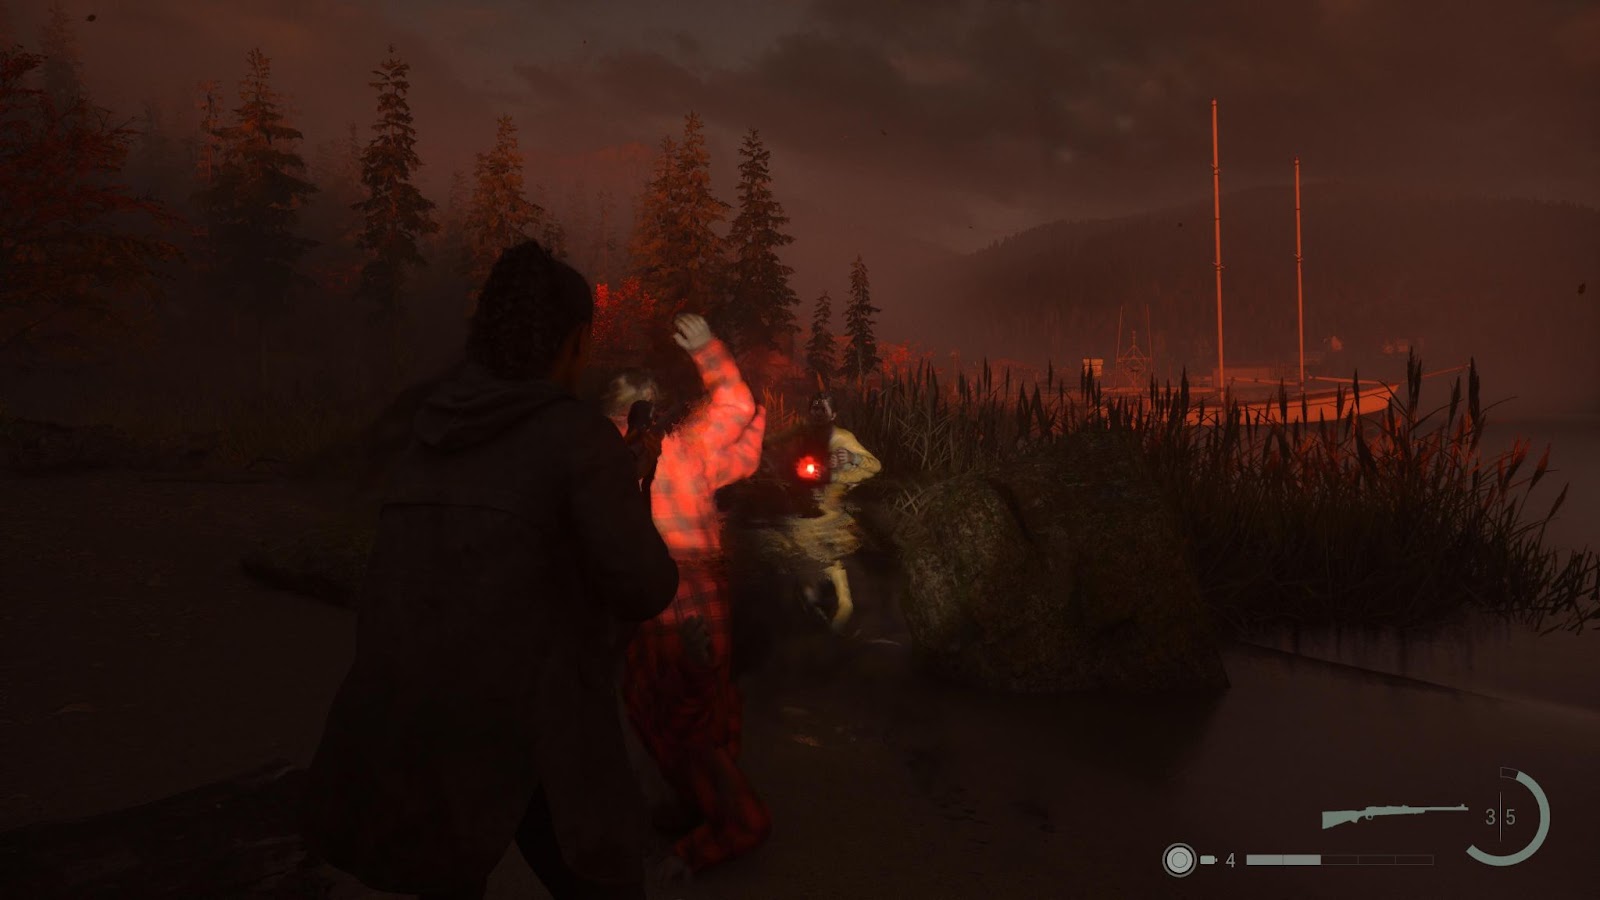 An in game screenshot of the Taken fight from the Bunker Woods beach nursery rhyme from Alan Wake 2. 